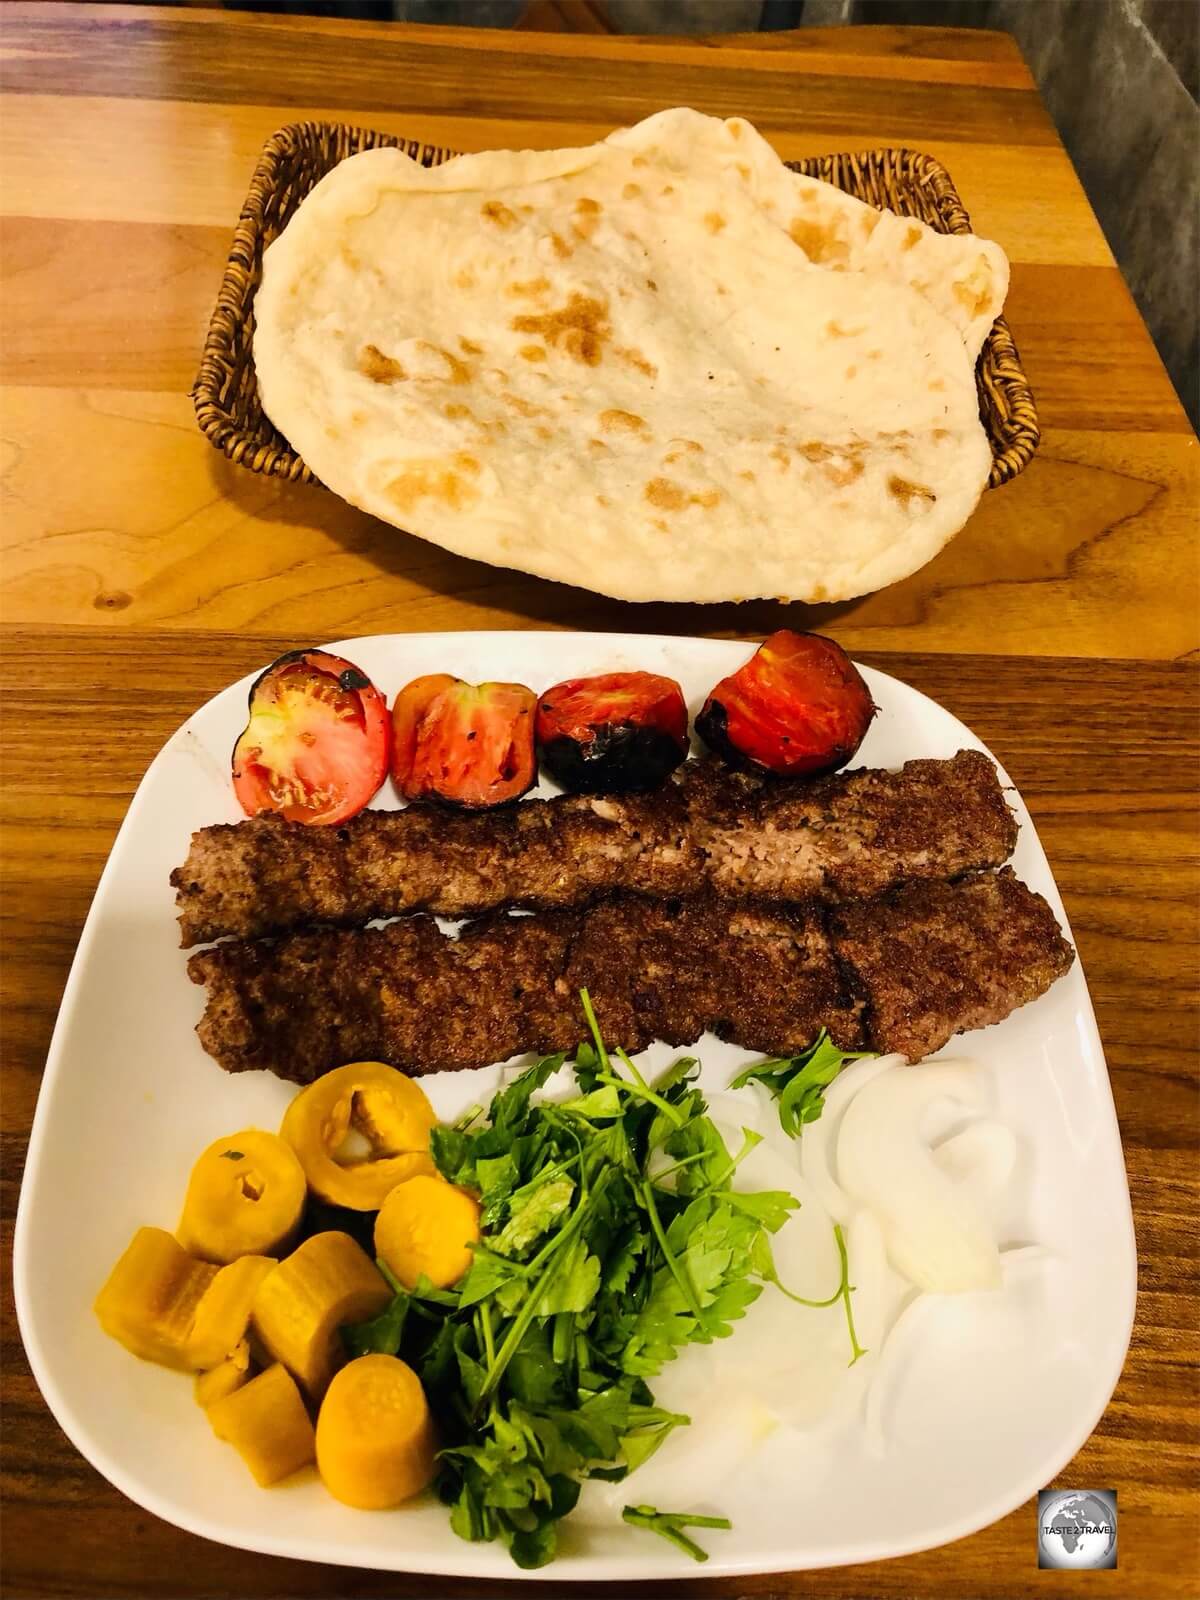 Typical meal of shish kebab, salad, pickled vegetables and flat bread.